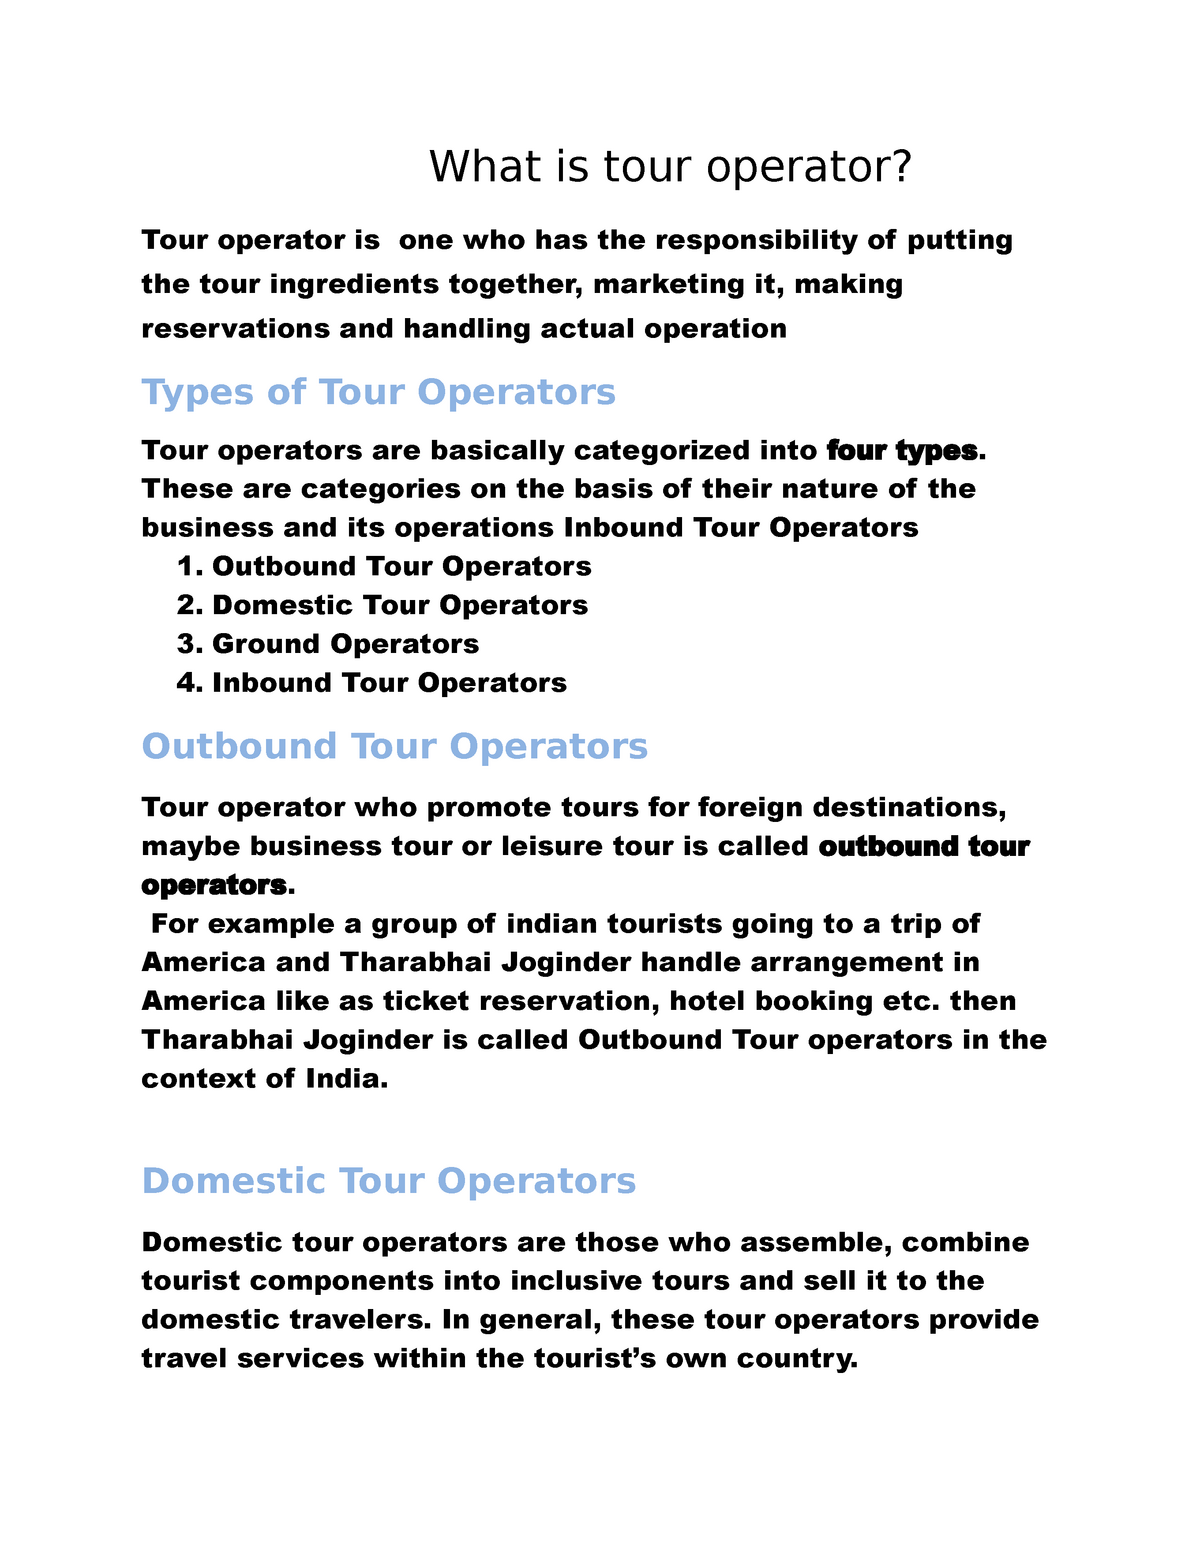 outbound tour operators examples uk